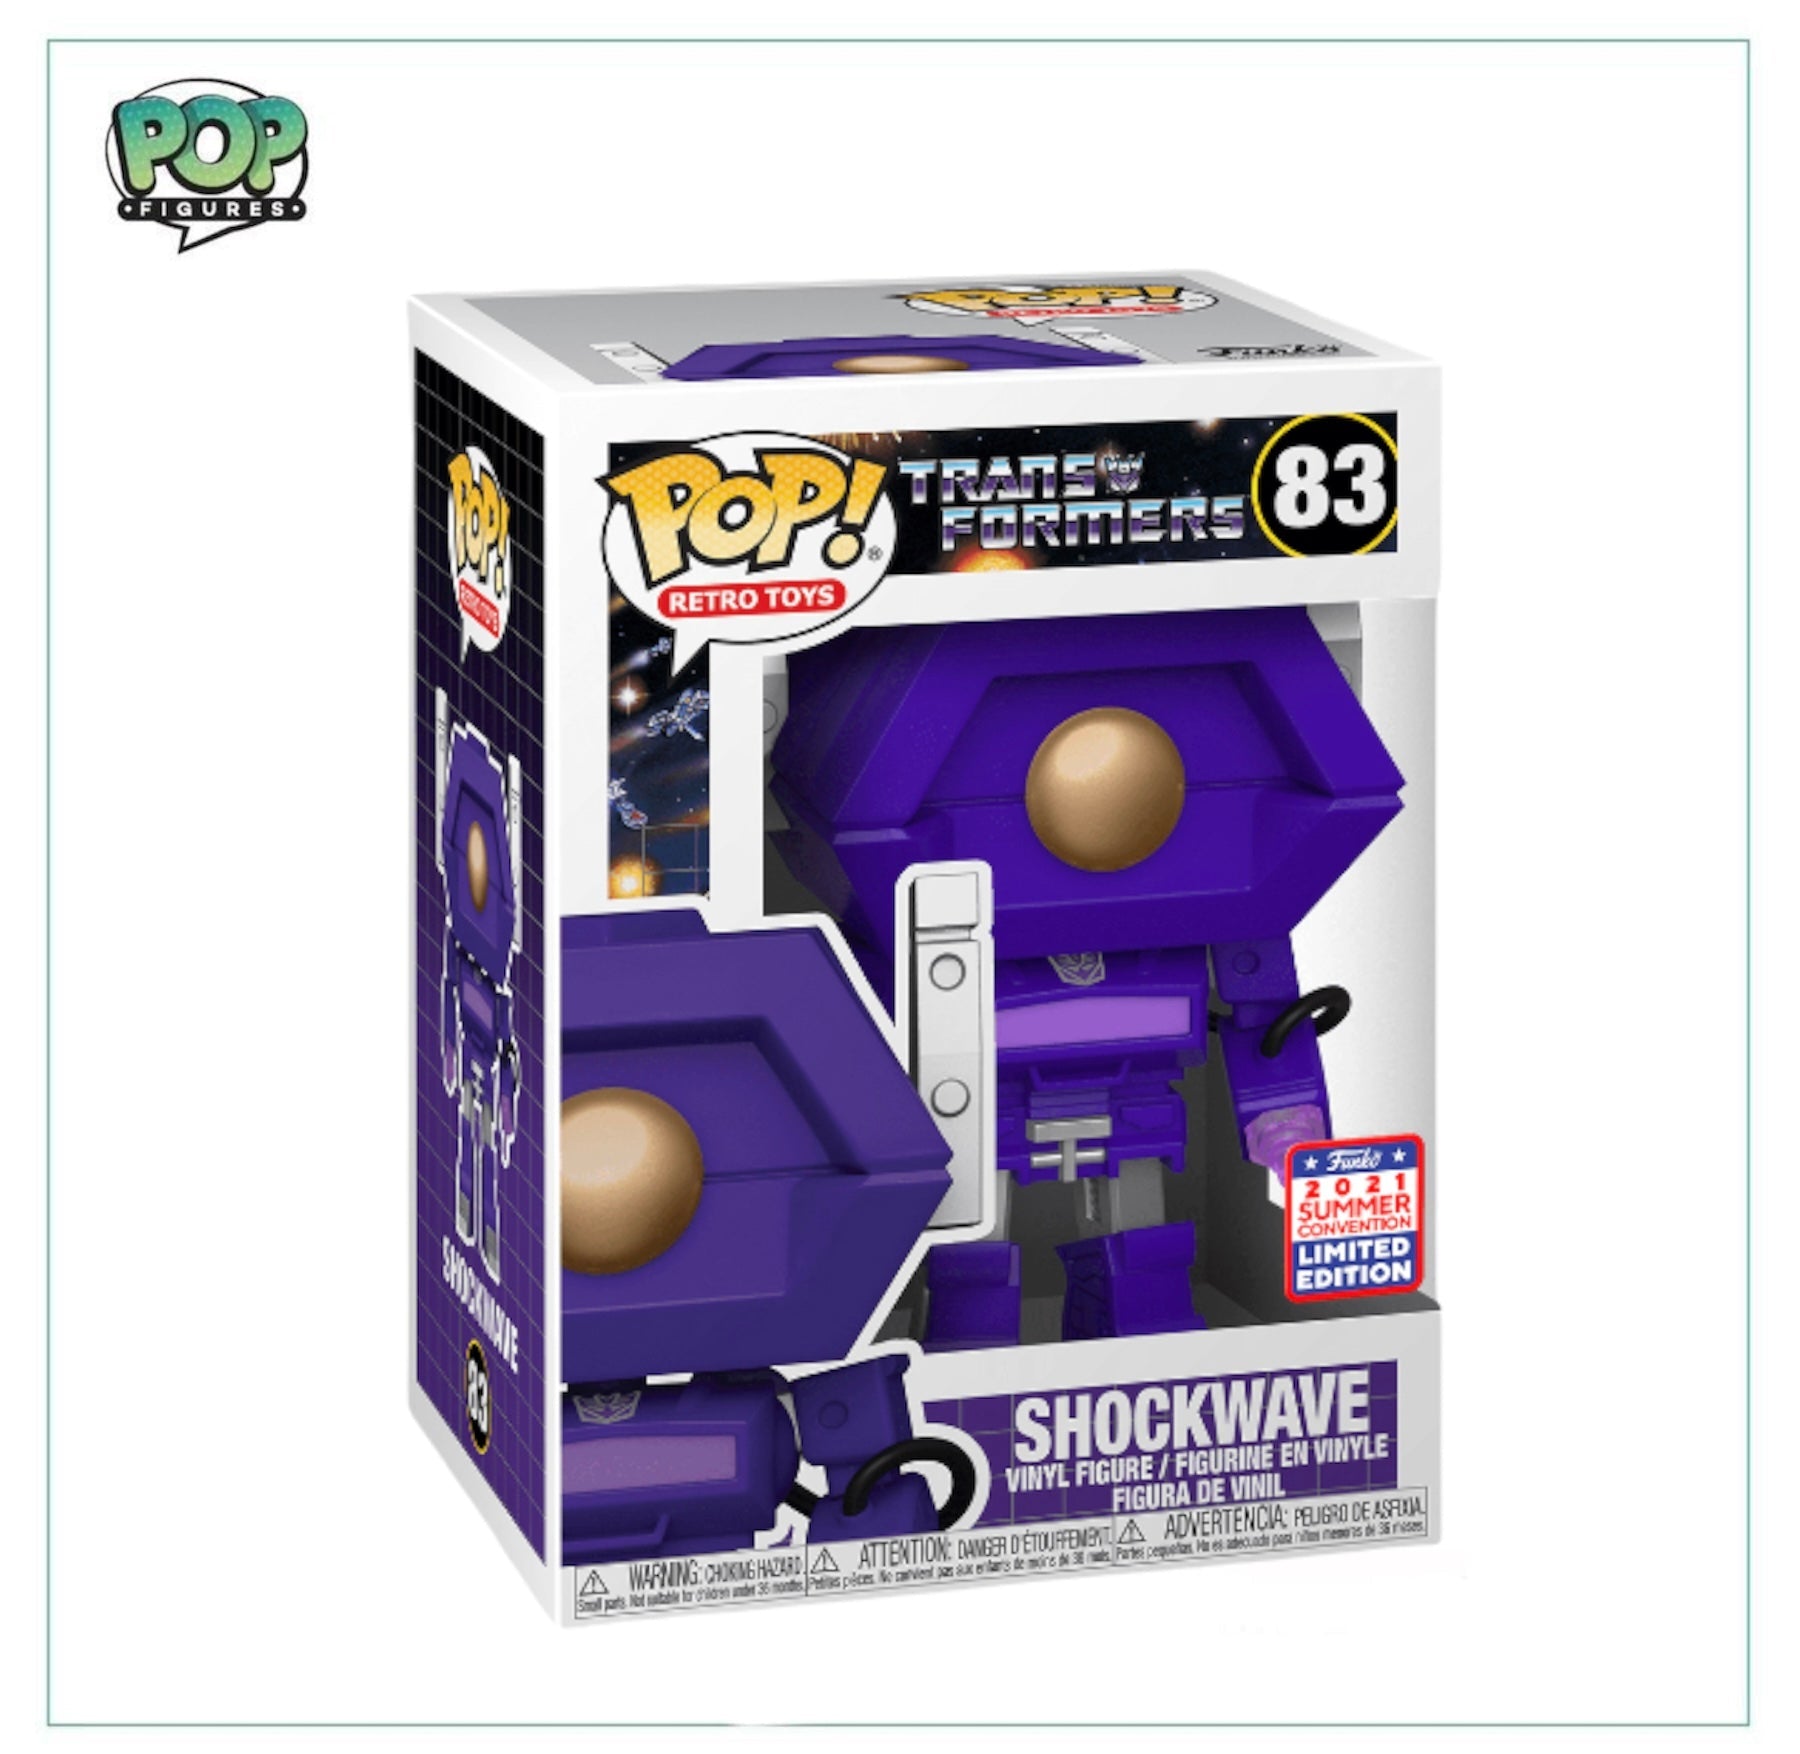 Shockwave #83 Funko Pop! Retro Toys - 2021 SDCC Limited Edition - Angry Cat